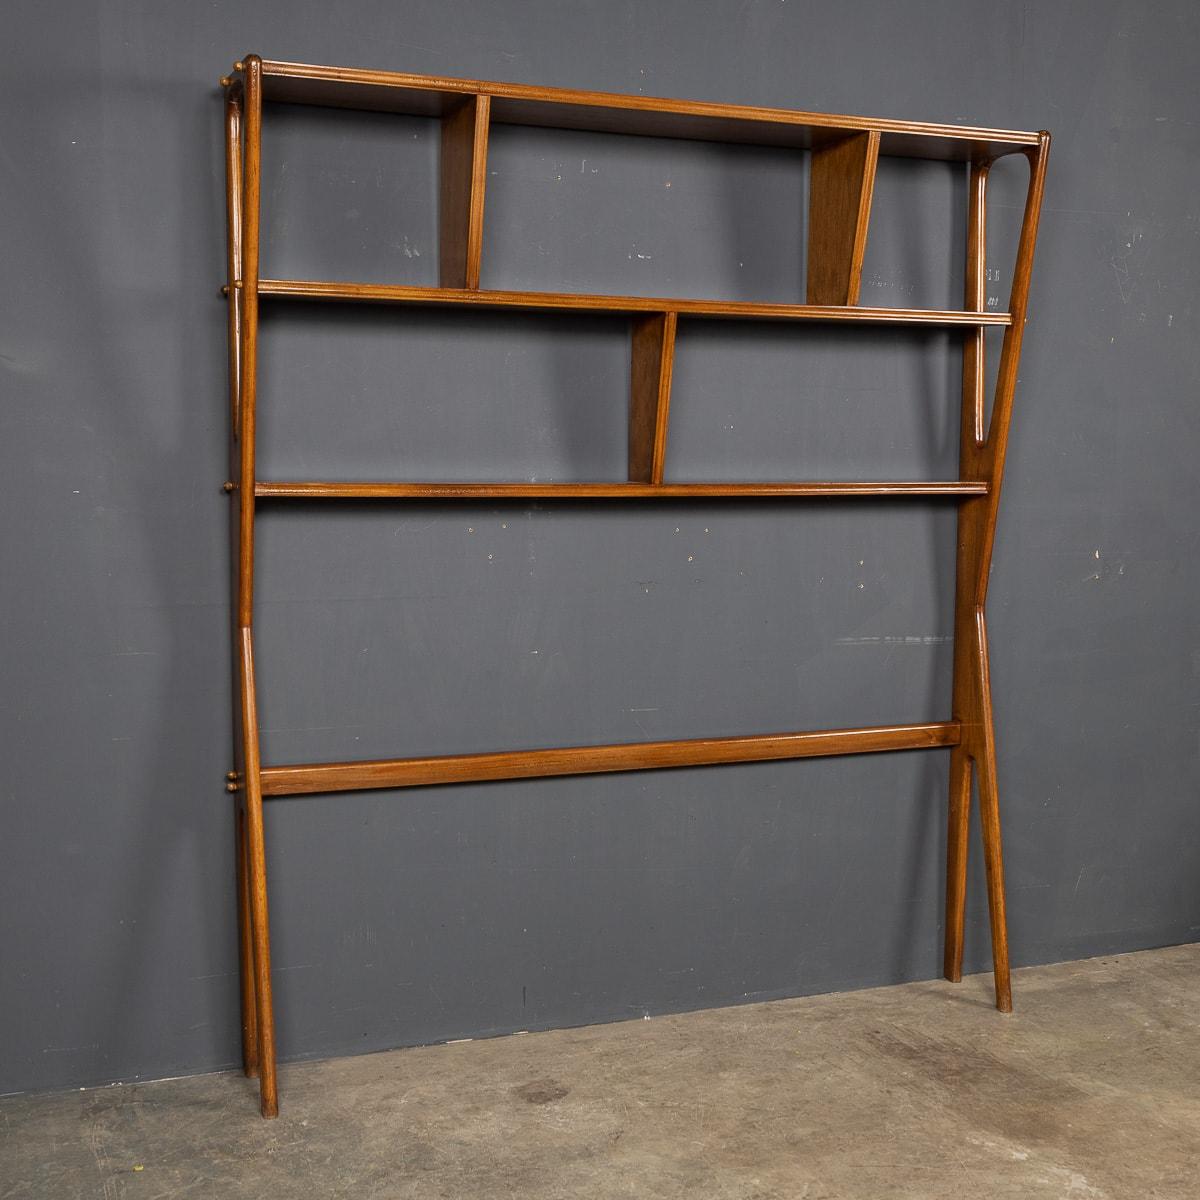 20th Century Italian Beech Wood Bookcase / Room Divider, c.1950 In Good Condition For Sale In Royal Tunbridge Wells, Kent